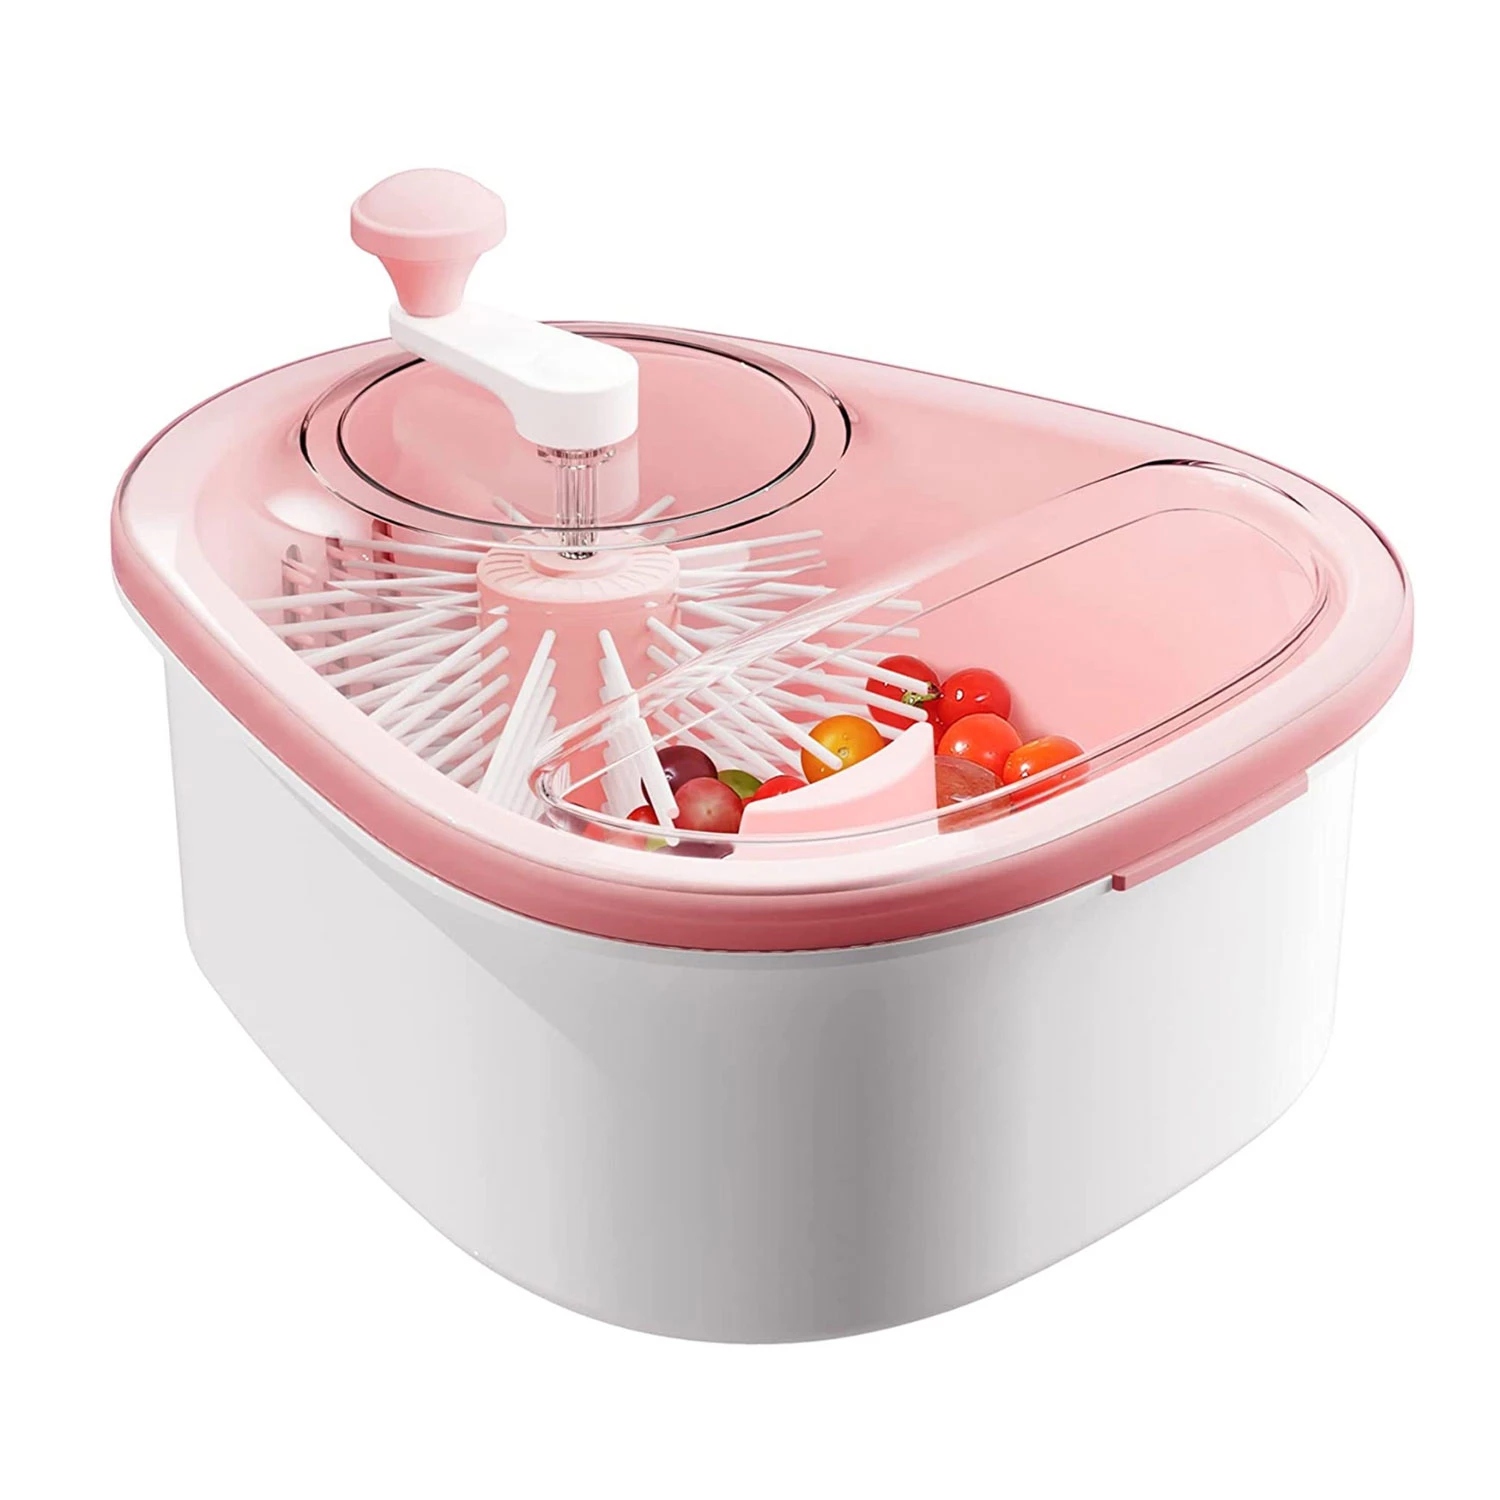 Salad Spinner with Brush - Hand Crank Fruit & Vegetable Cleaning Device - Kitchen Gadget